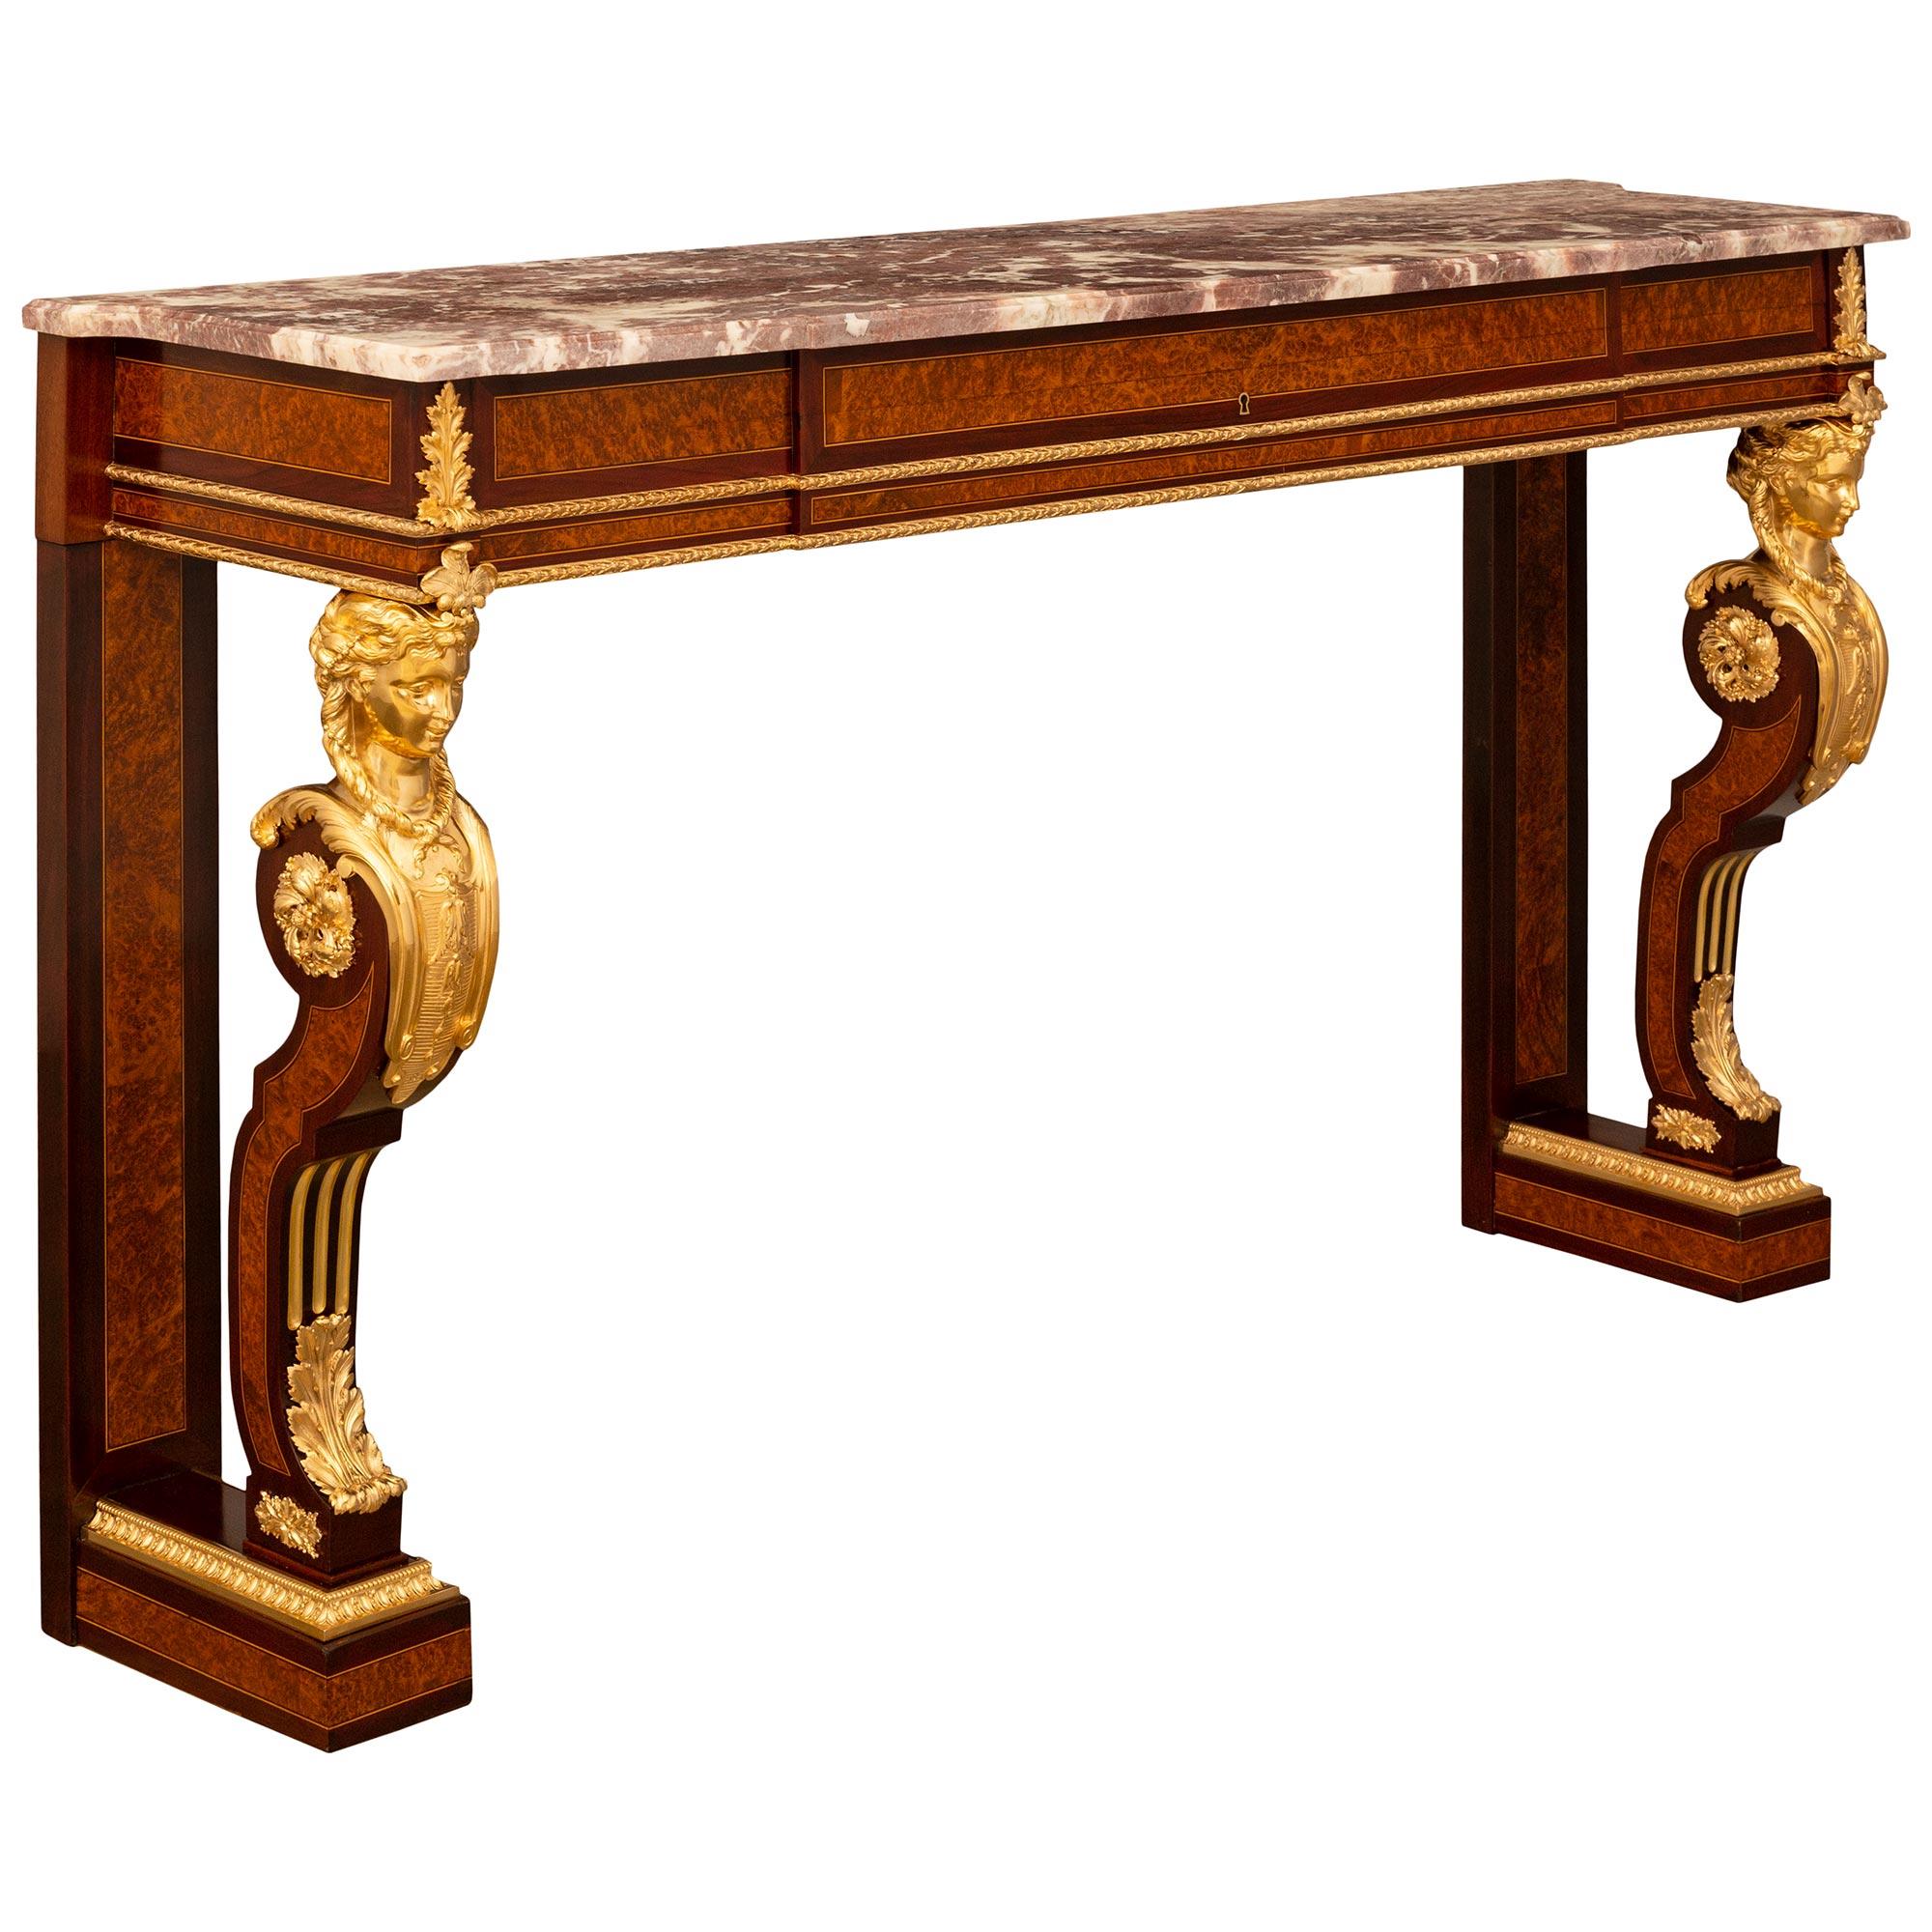 French 19th Century Louis XVI St. Burl Wood, Mahogany, Ormolu And Marble Console In Good Condition For Sale In West Palm Beach, FL